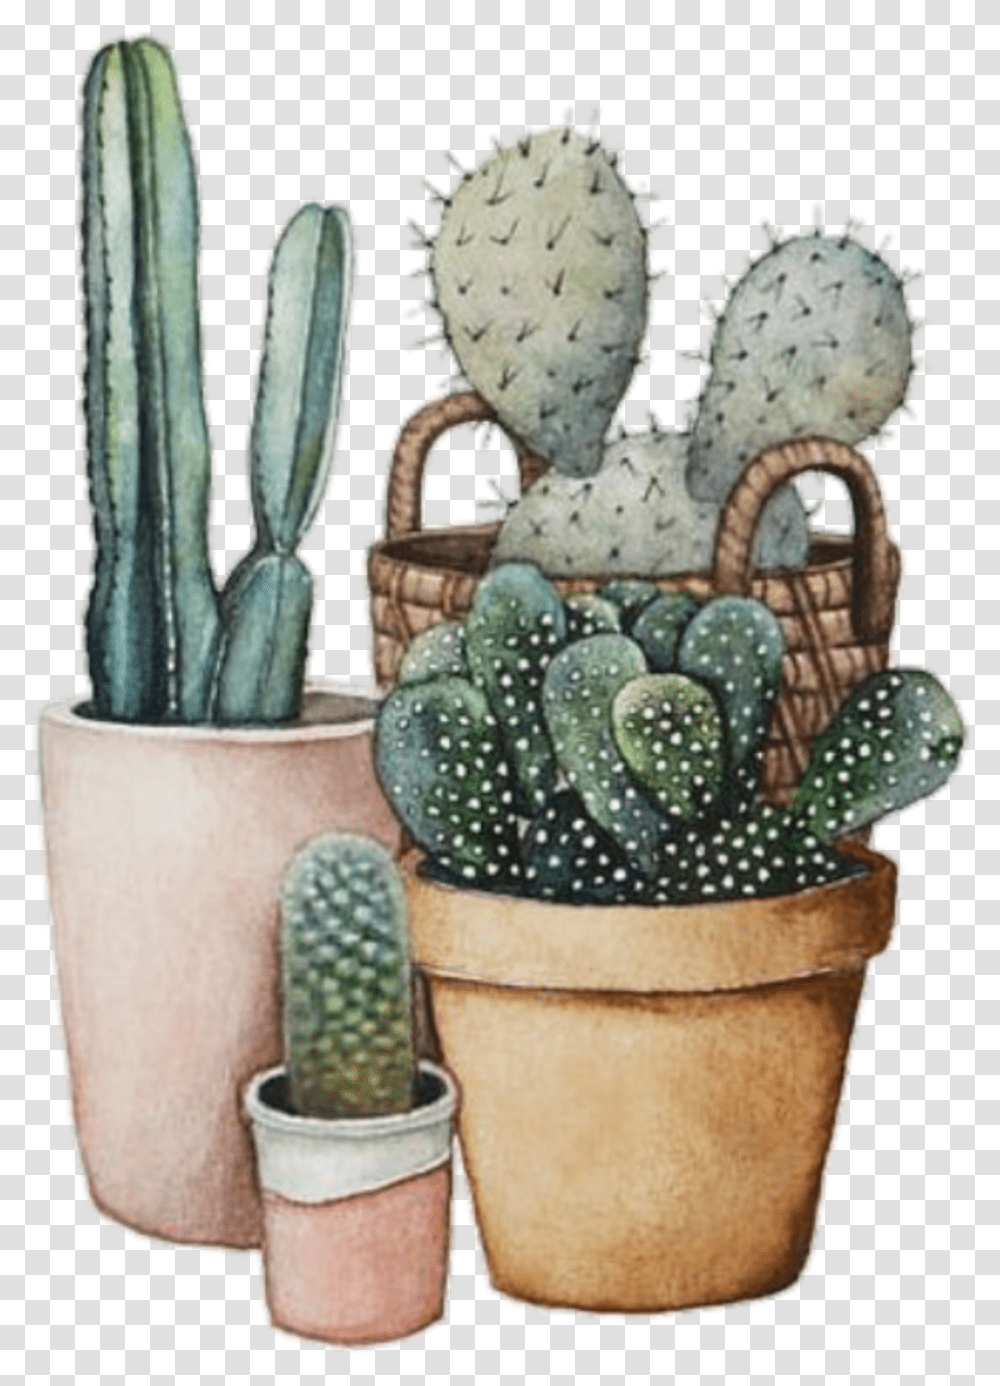 Cacti Tumblr Plant Drawing Friends Plants Are Watercolor Succulents In Cup, Cactus, Wedding Cake, Dessert, Food Transparent Png